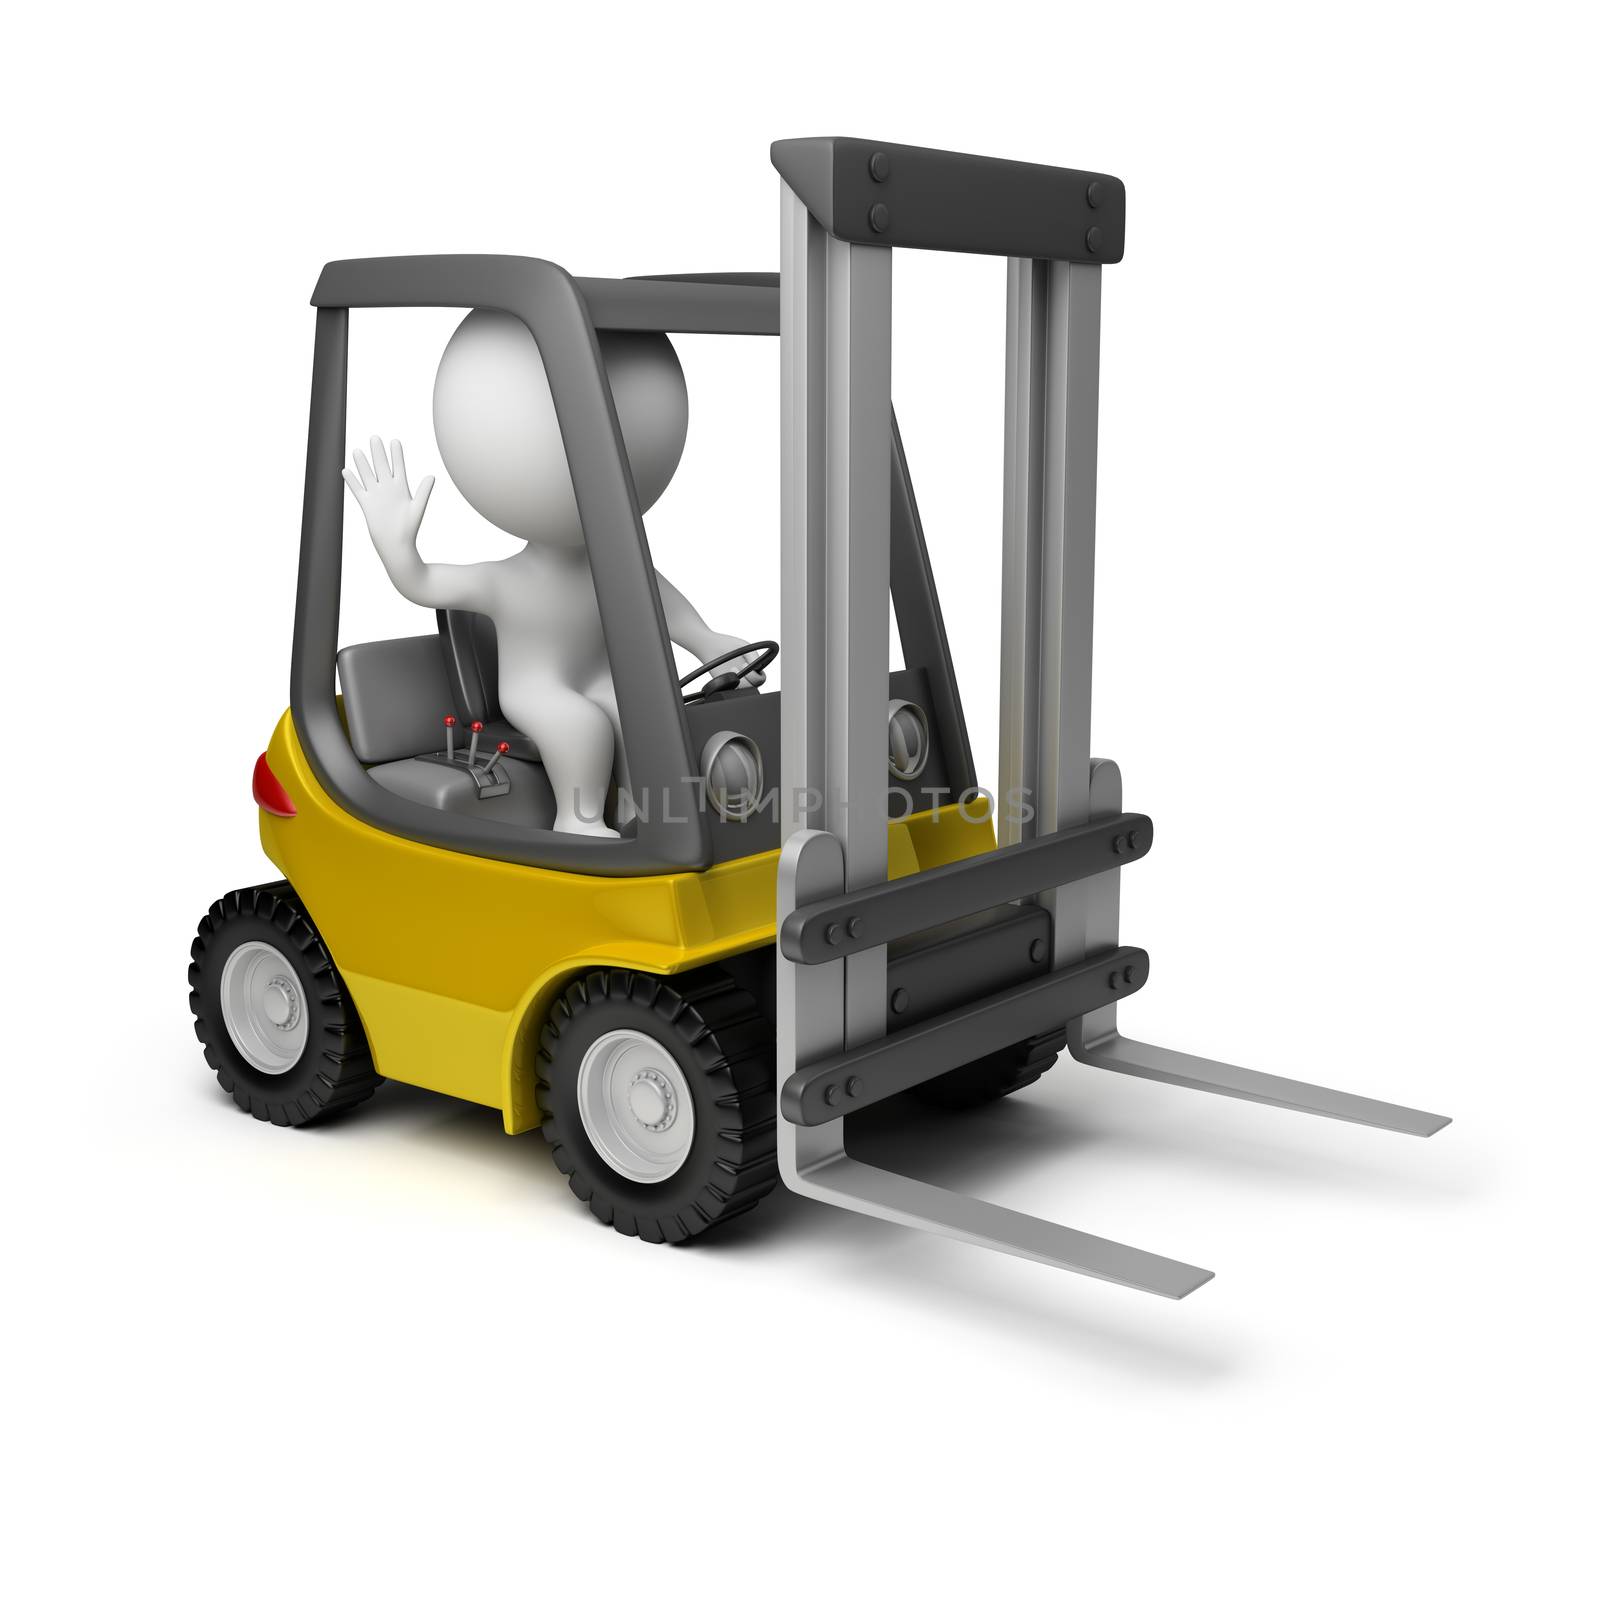 3d small person sitting in a forklift. 3d image. Isolated white background.